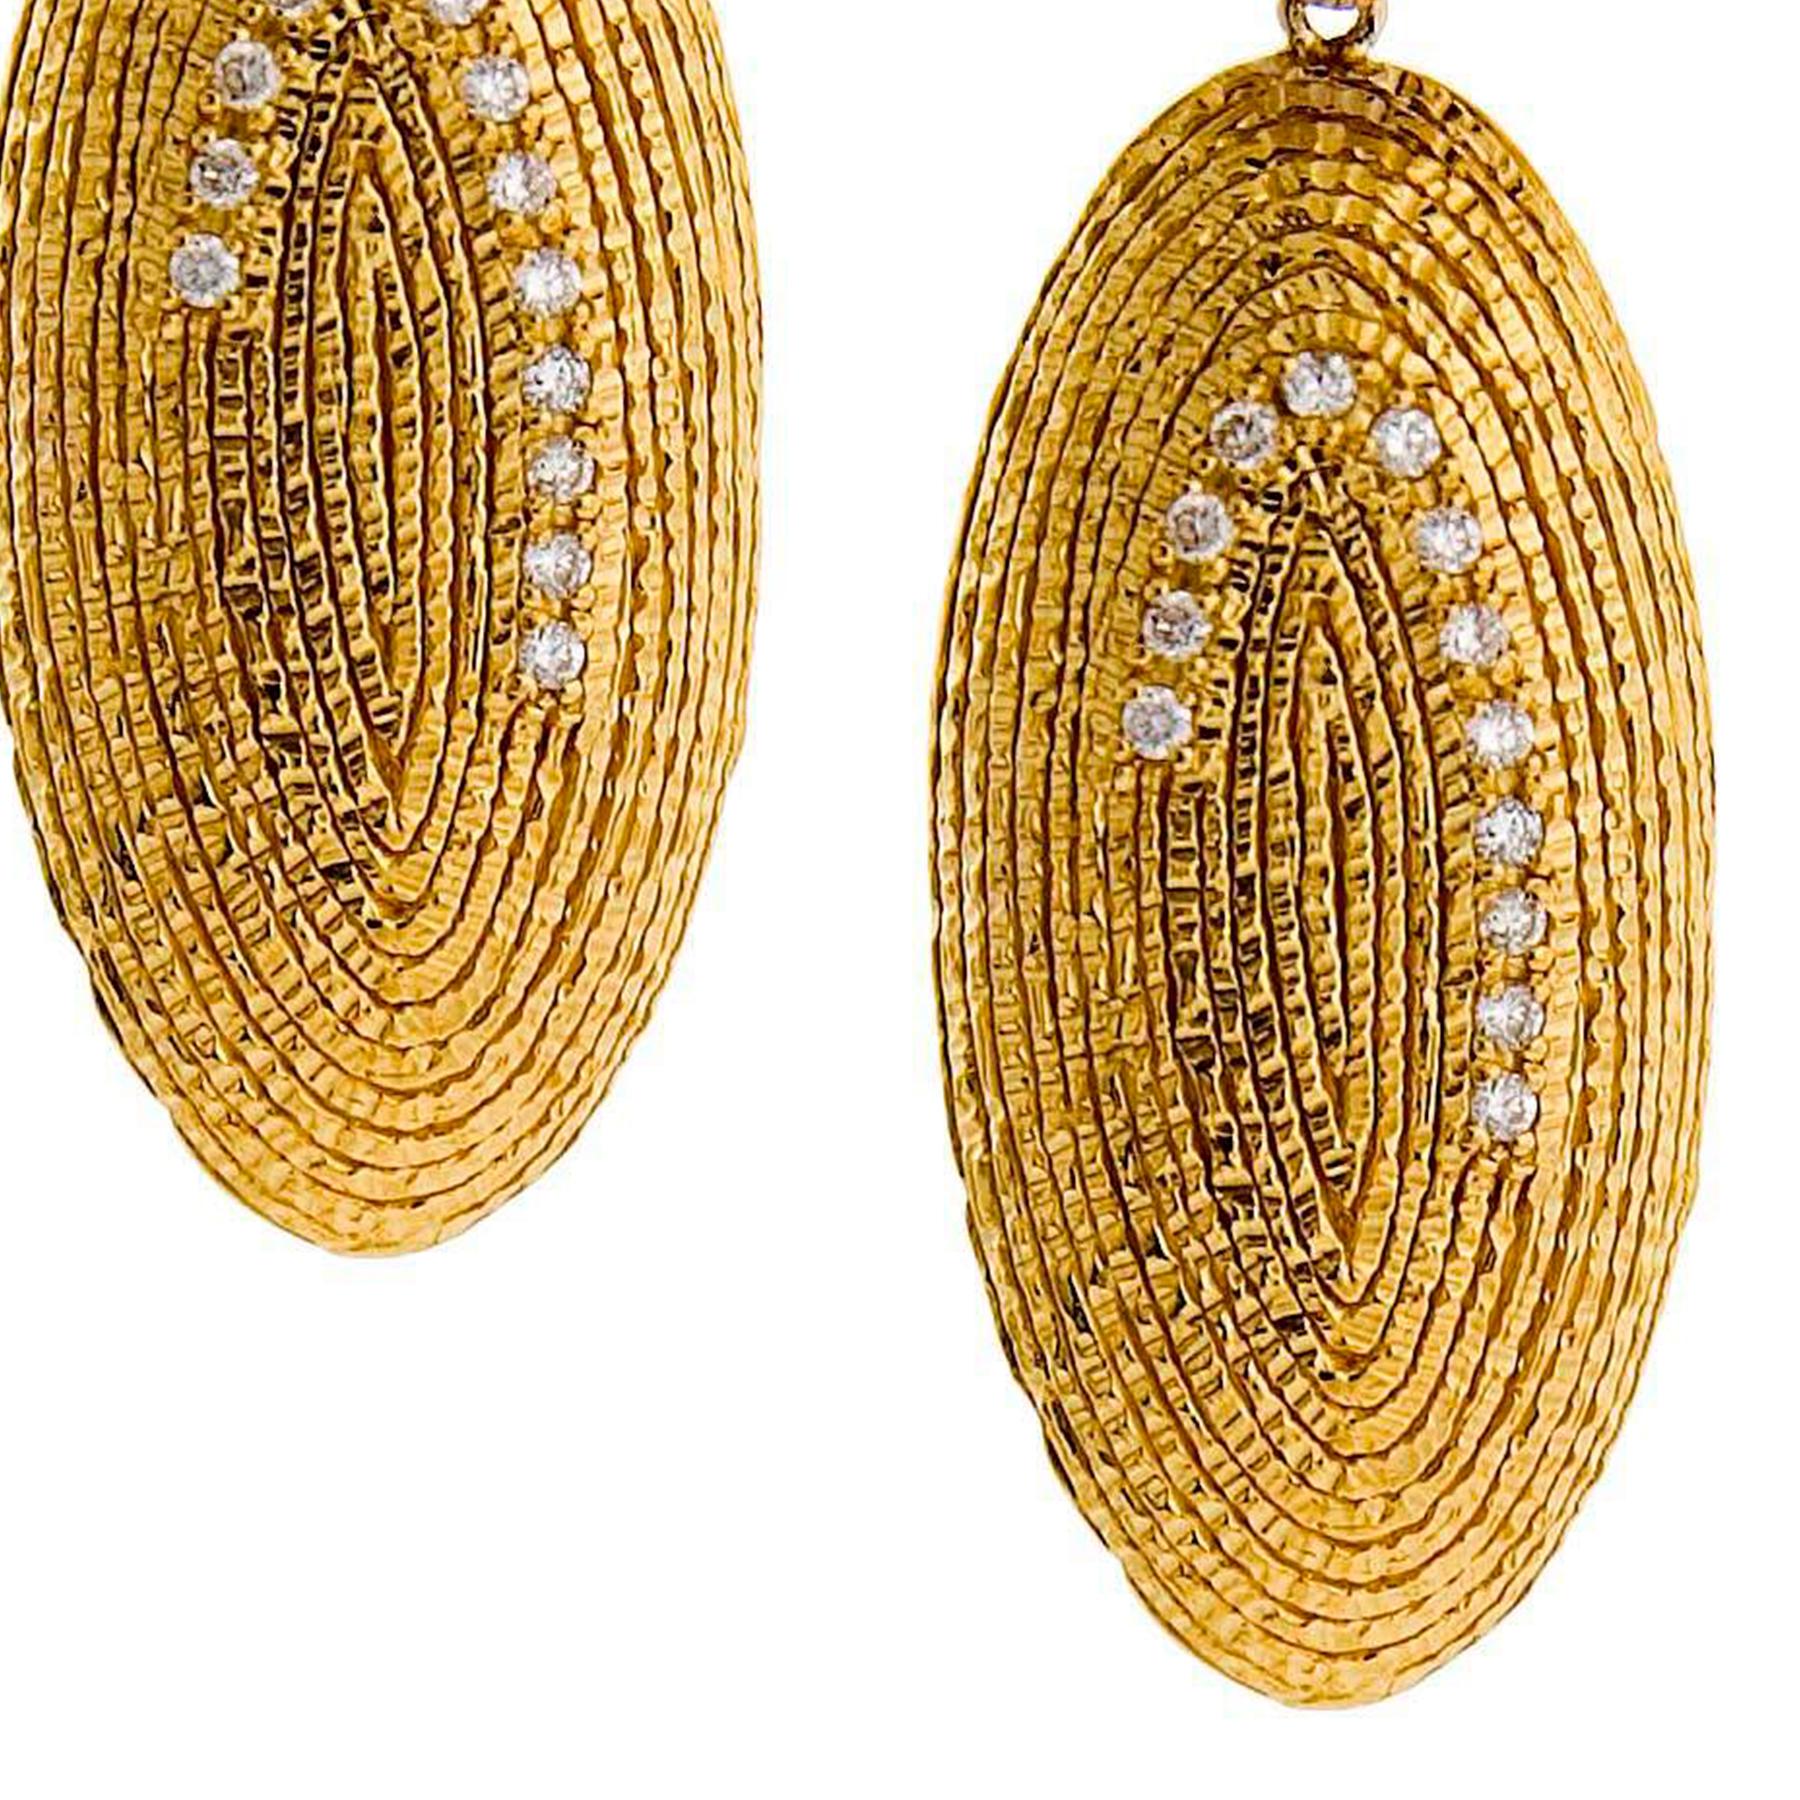 Oval Hammered Wire Earrings Set in 20 karat Yellow Gold with 0.41-carat Brilliant-cut Diamonds. These one-of-a-kind oval earrings are part of COOMI's Eternity Collection. This collection focuses on the flow of movement through different shapes such